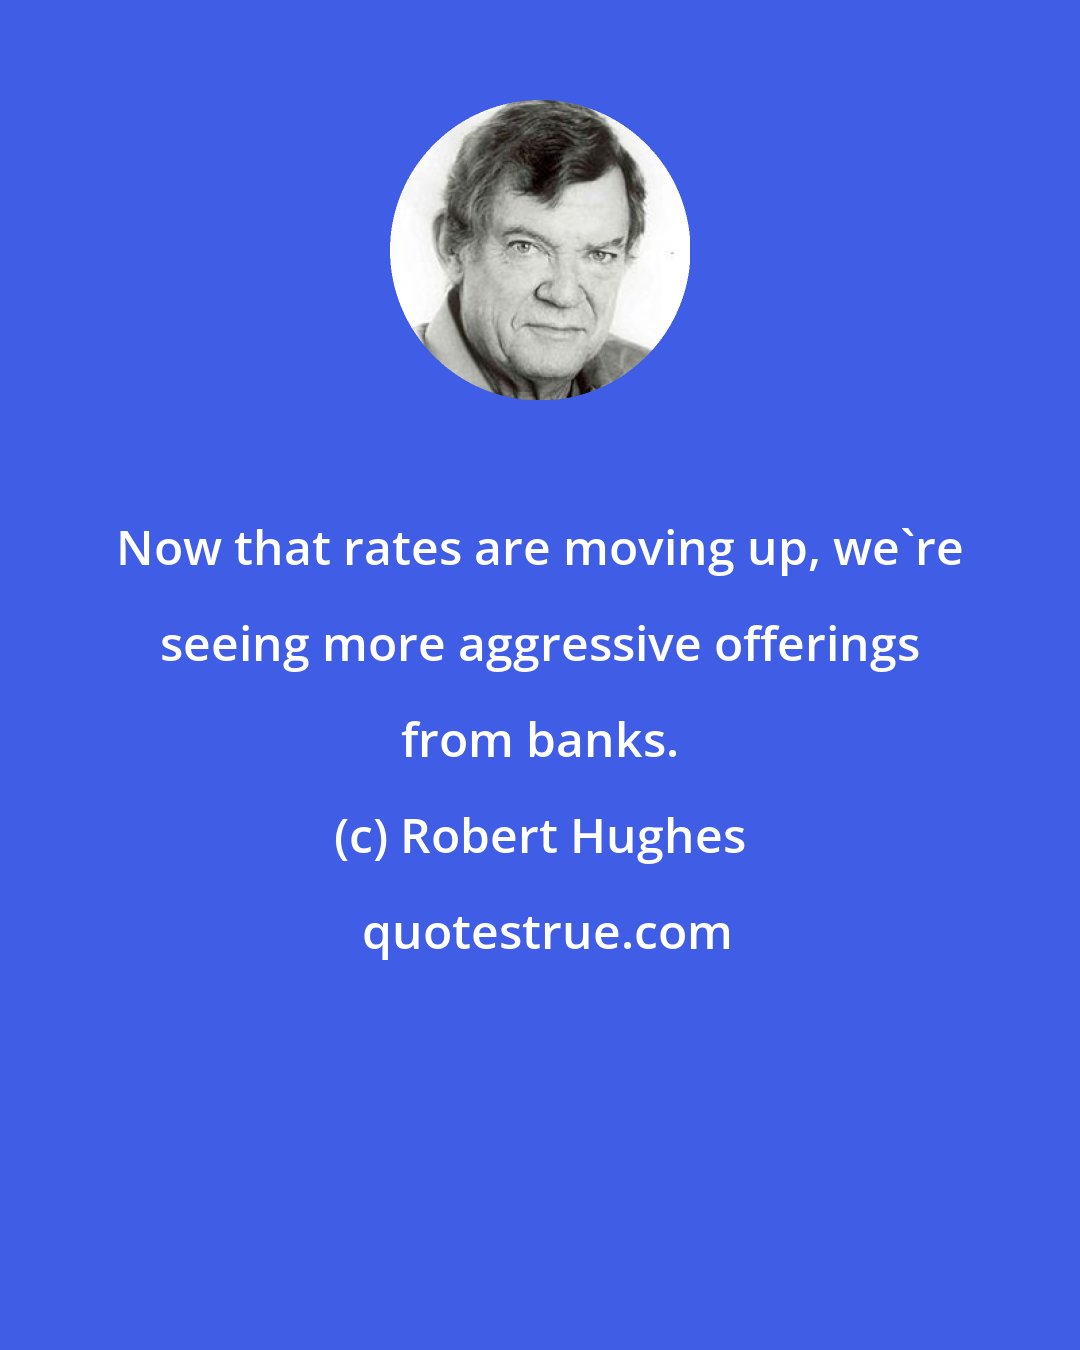 Robert Hughes: Now that rates are moving up, we're seeing more aggressive offerings from banks.